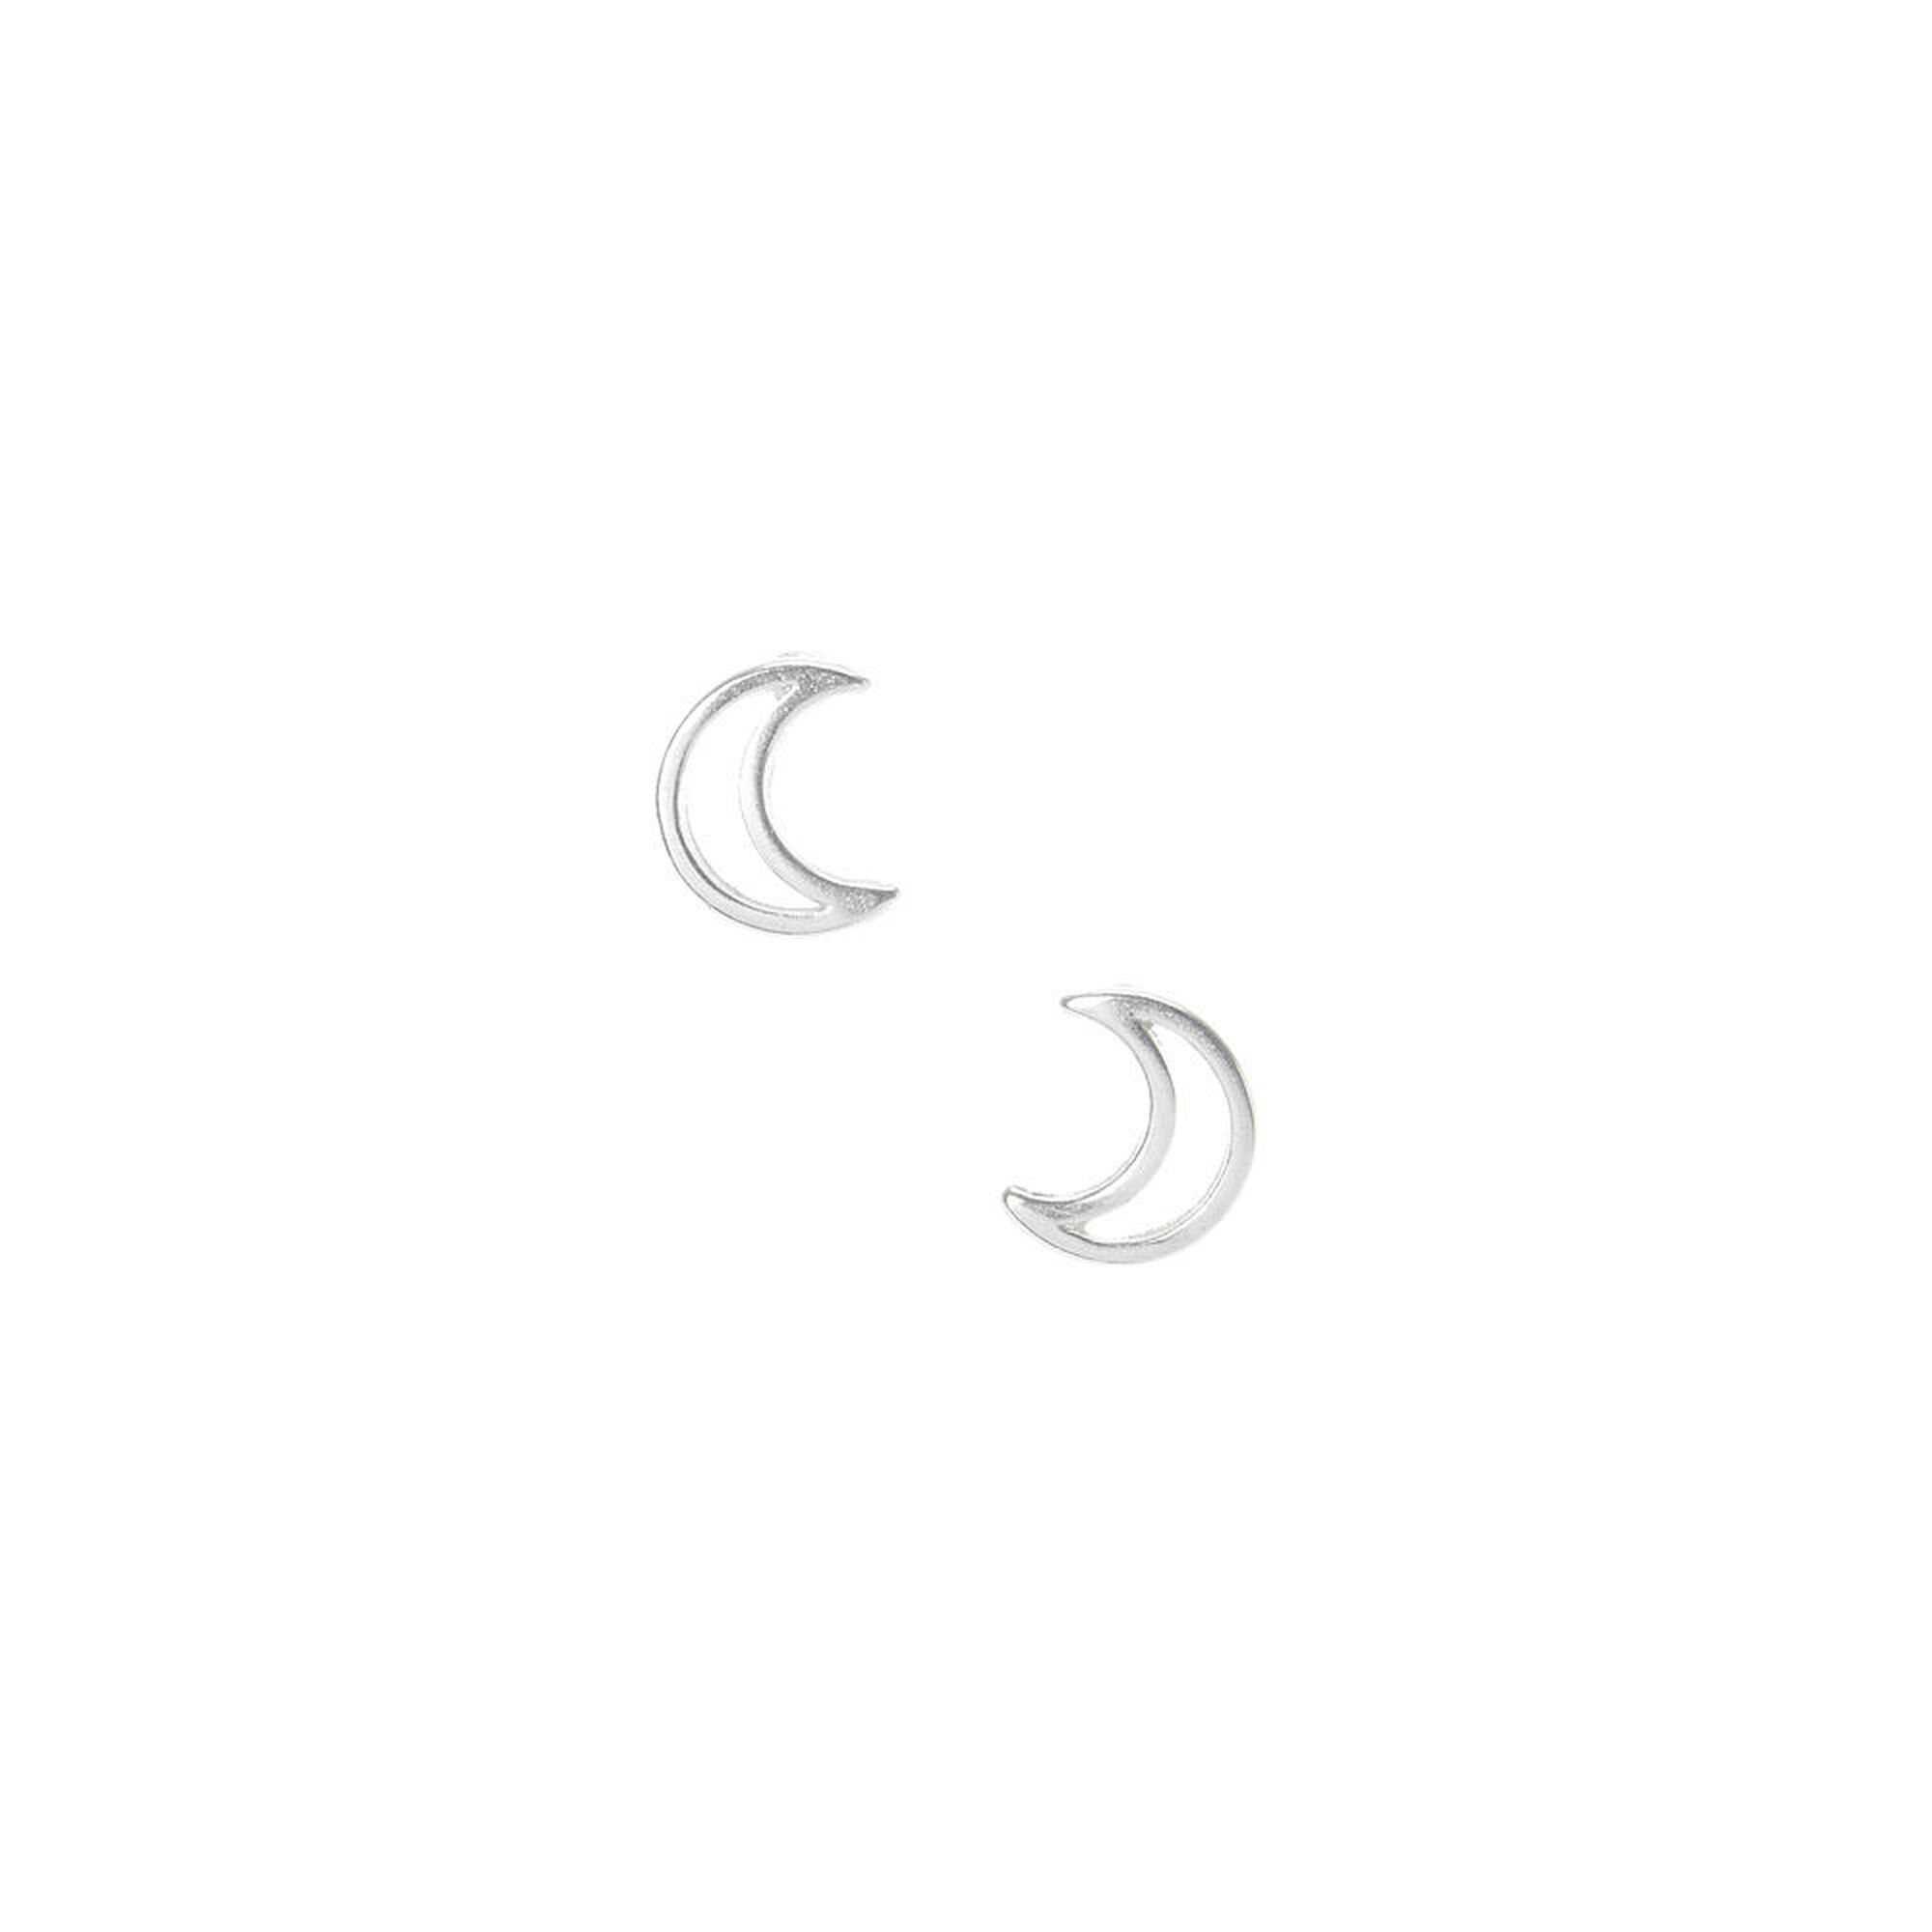 View Claires Crescent Moon Stud Earrings Silver information